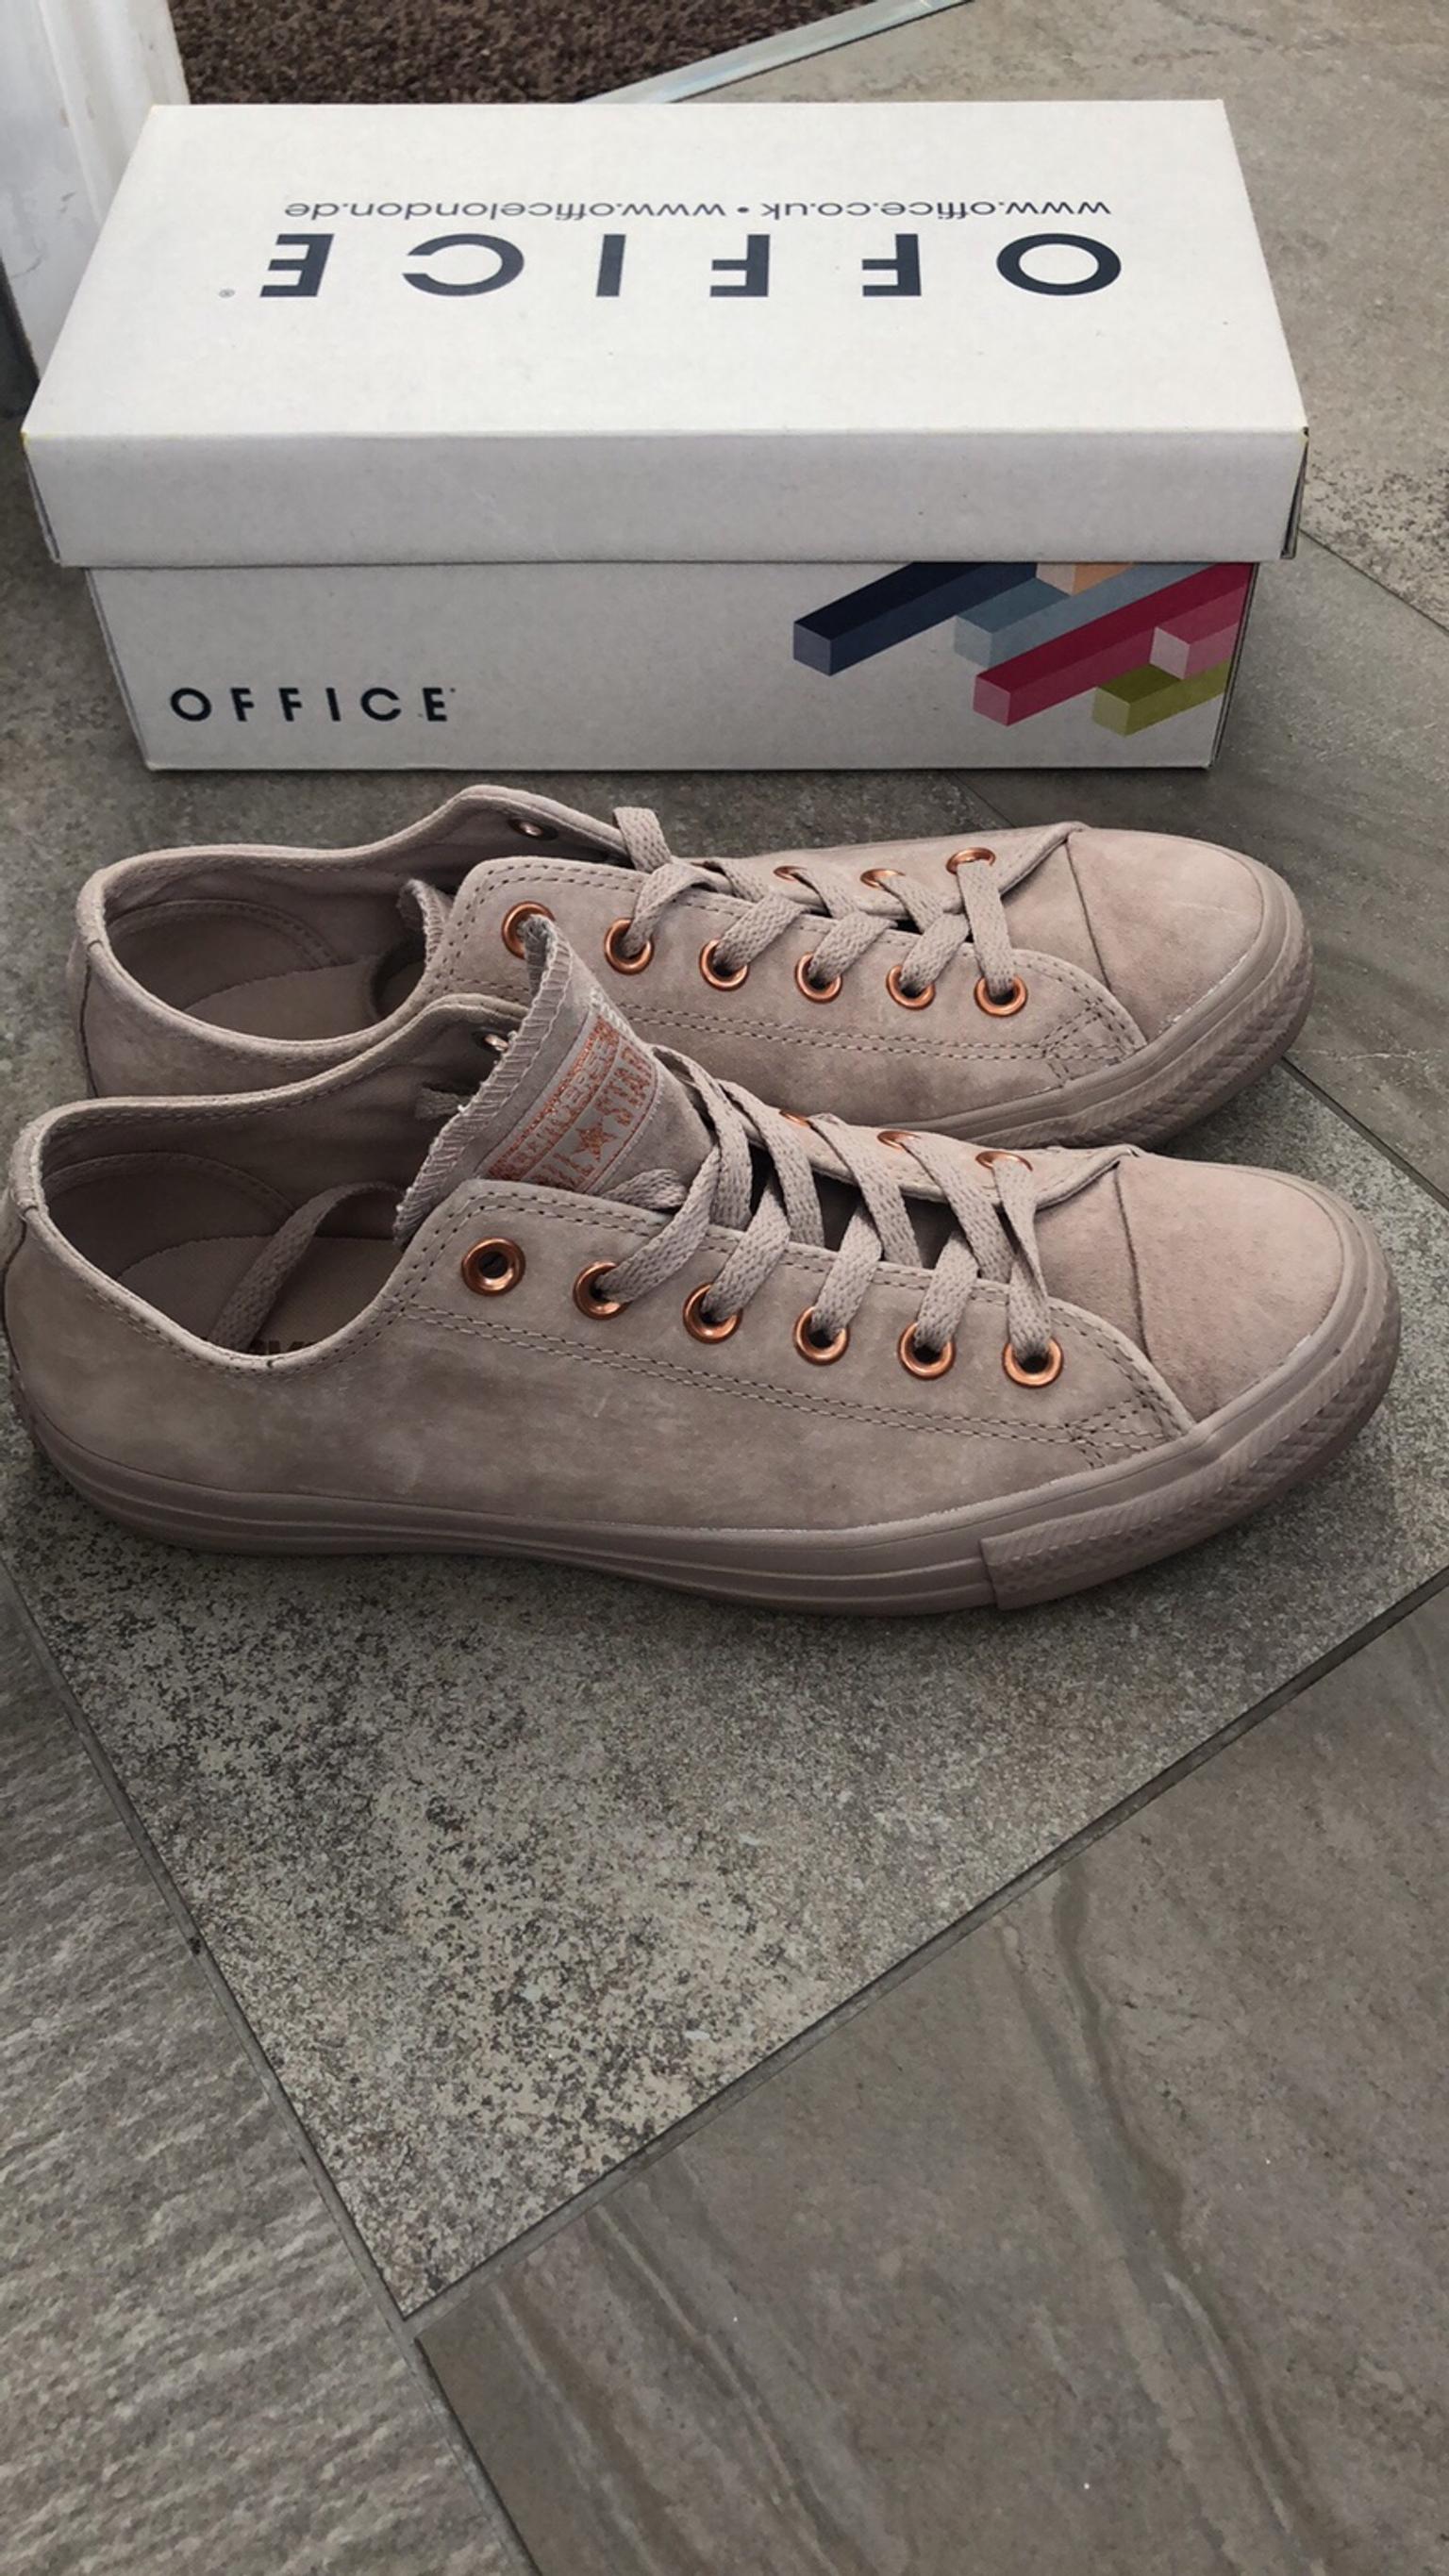 converse grey and rose gold